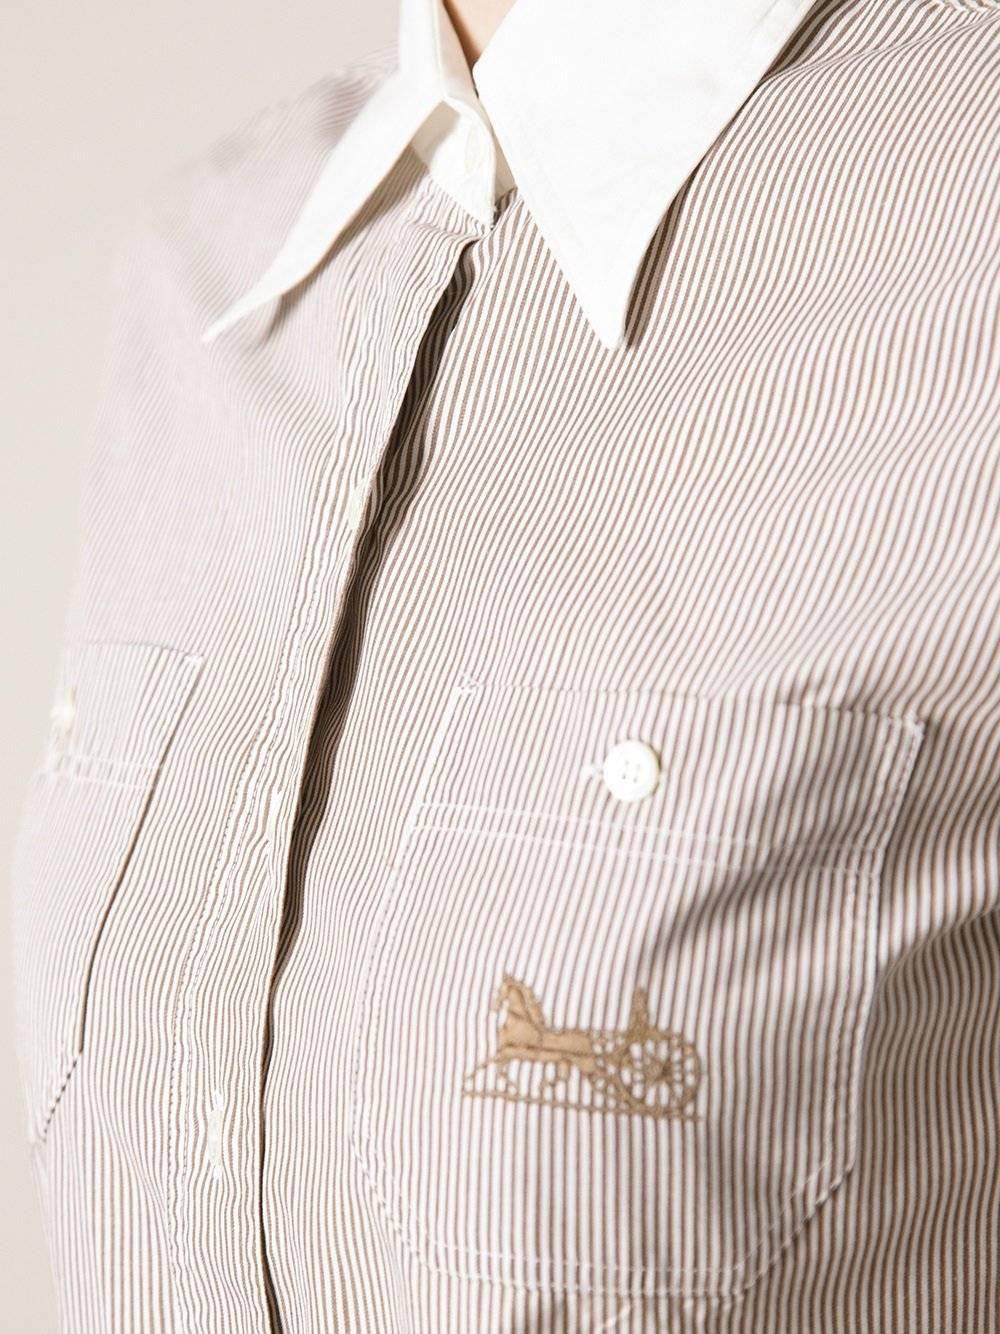 Short-sleeved Céline shirt 100% cotton, striped in white and brown, with an embroidered horse logo on the left pocket. It features a white collar, frontal buttons closure and two pockets on the breast.  The item is vintage, it was produced in the